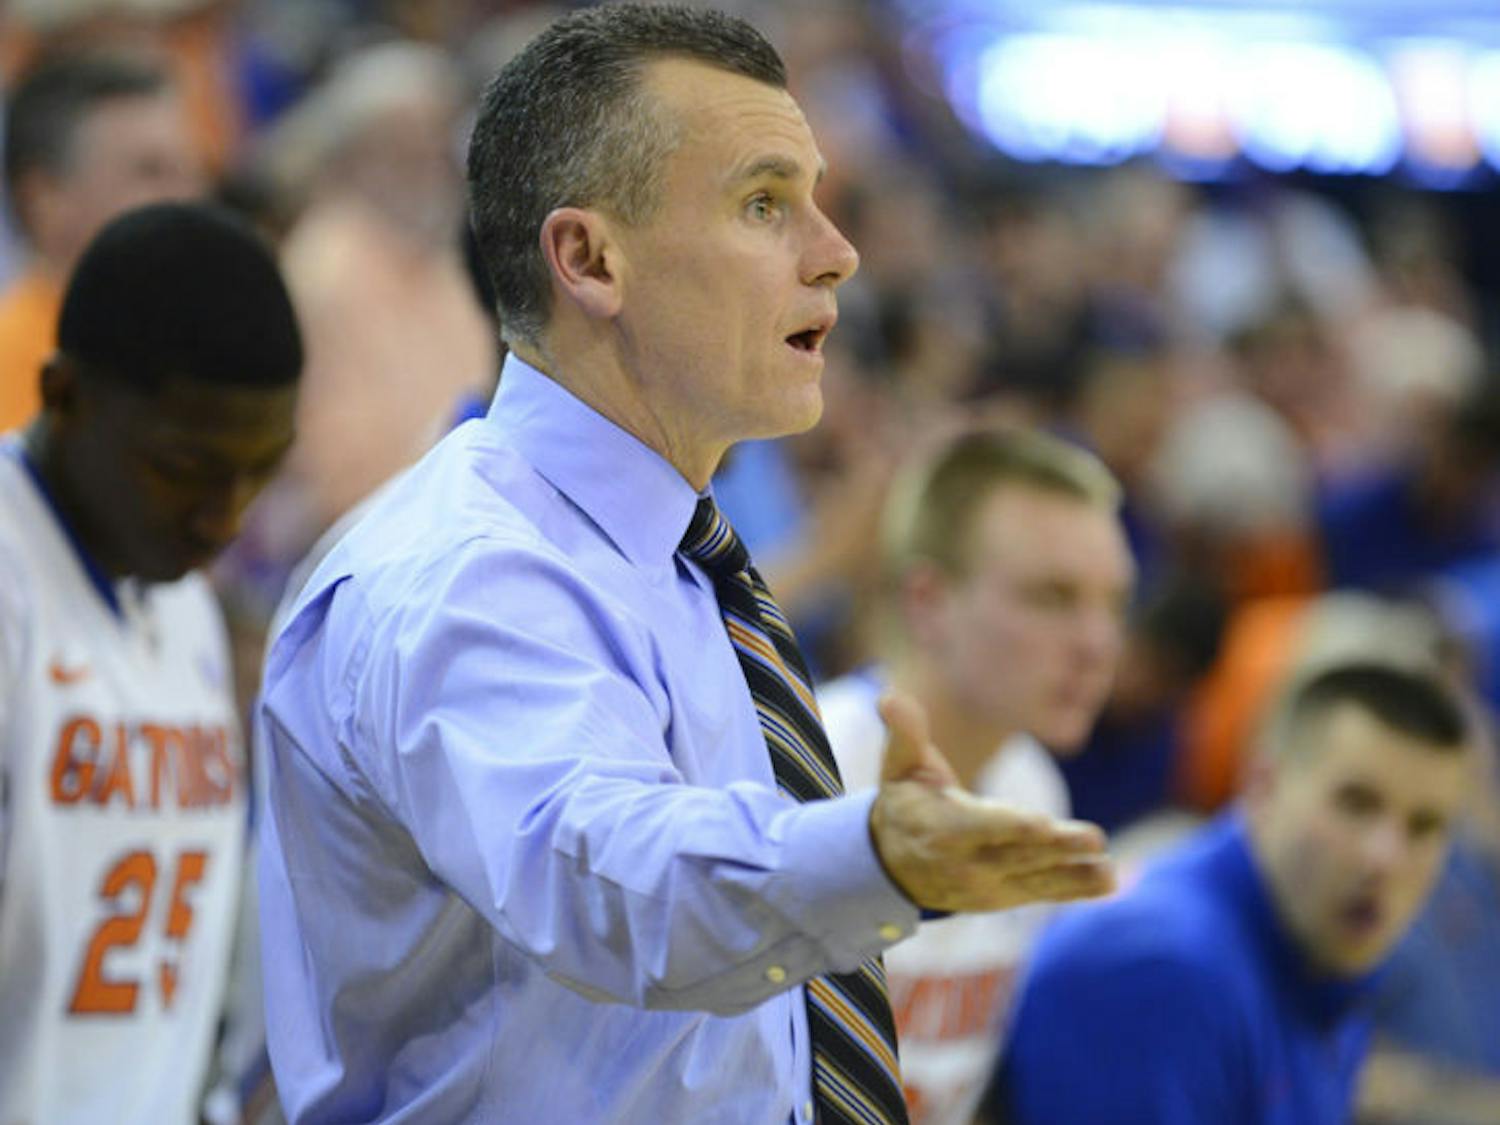 Billy Donovan questions a call during Florida’s 71-66 win over Auburn on Feb. 19. The Gators moved to No. 1 in the Associated Press poll following their win against Ole Miss and former No. 1 Syracuse’s losses to Boston College and Duke.